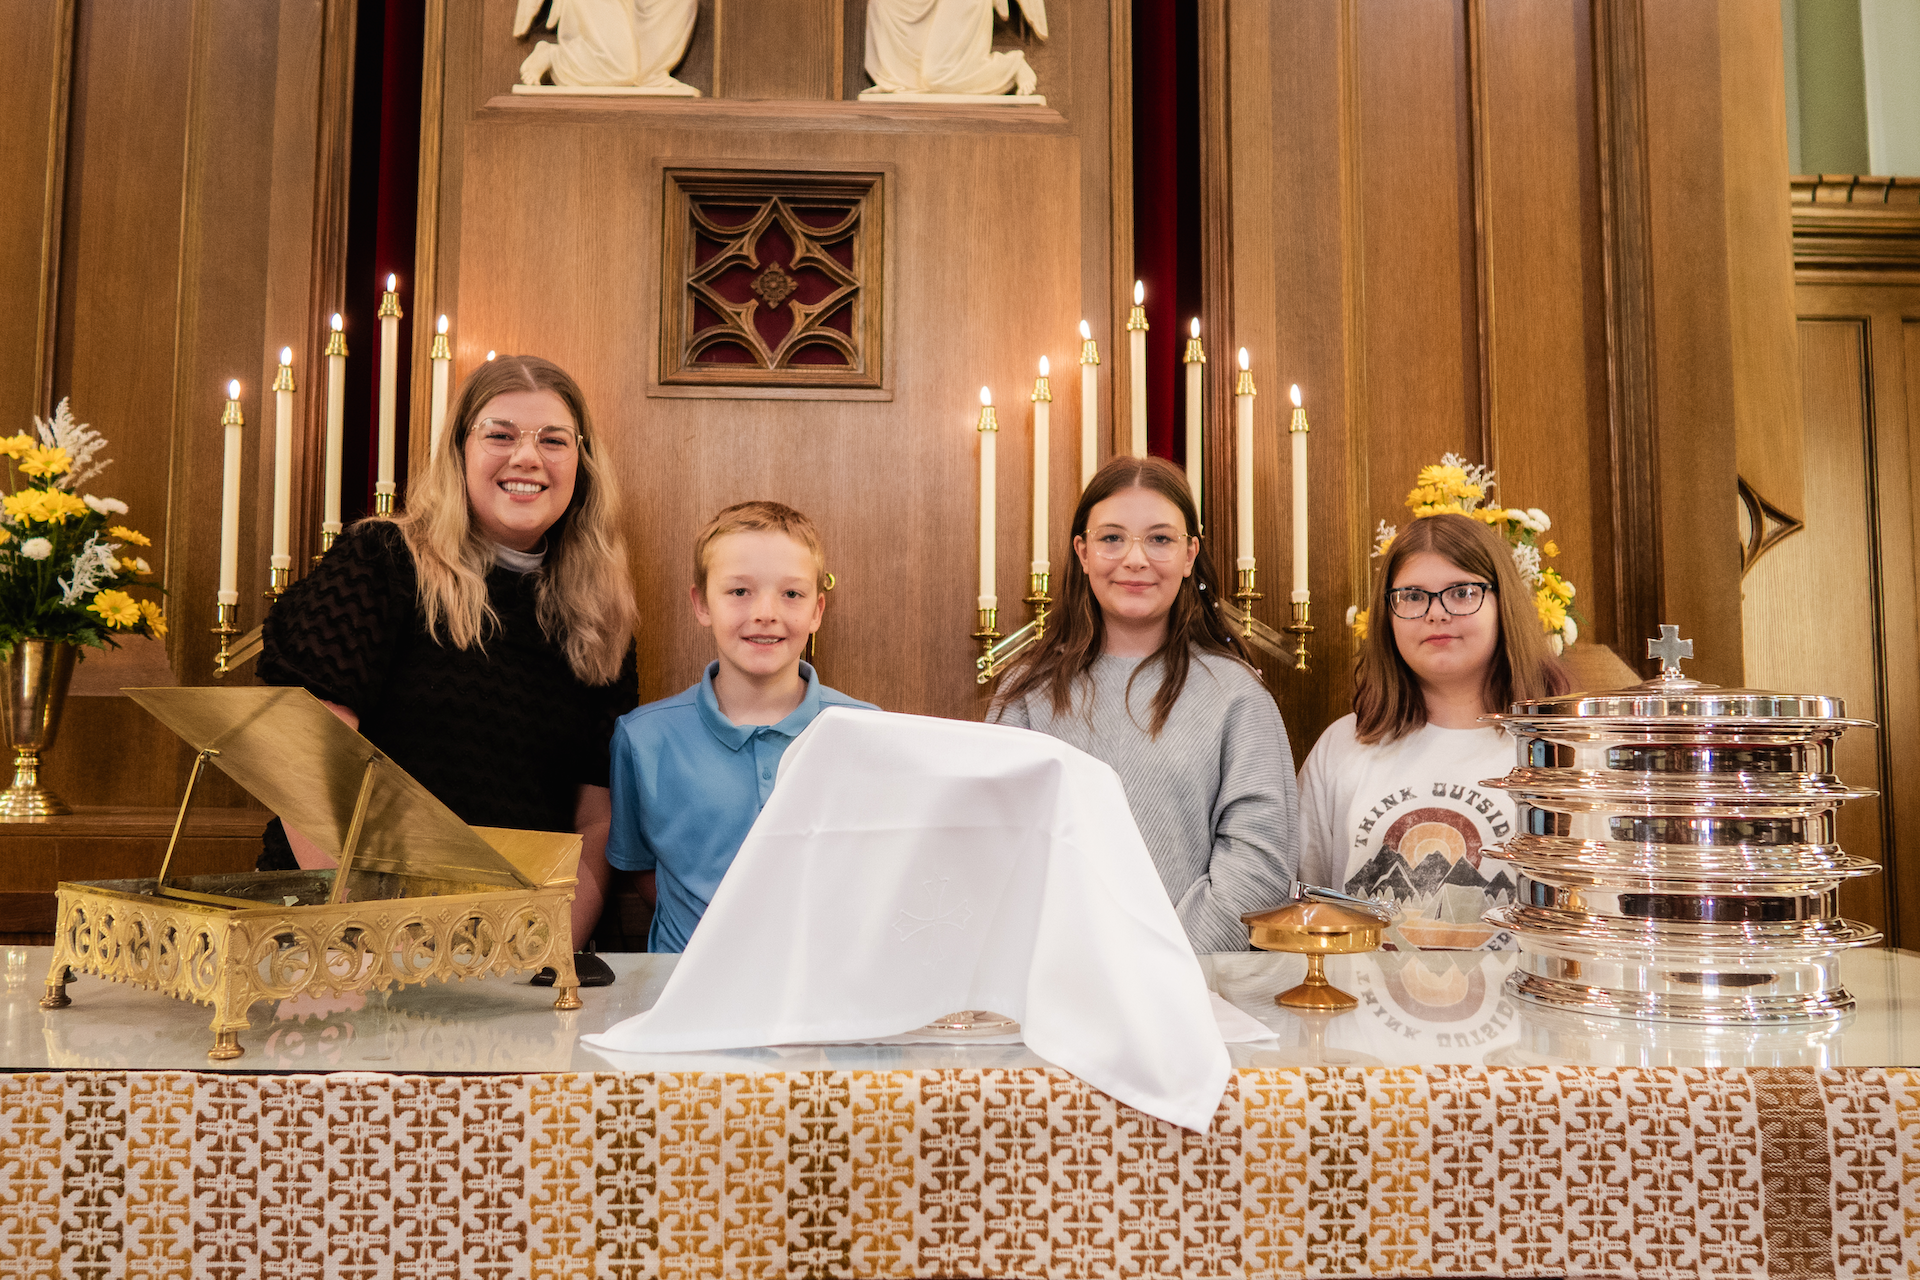 Congratulations to Bethany's youth who celebrated their first communion!